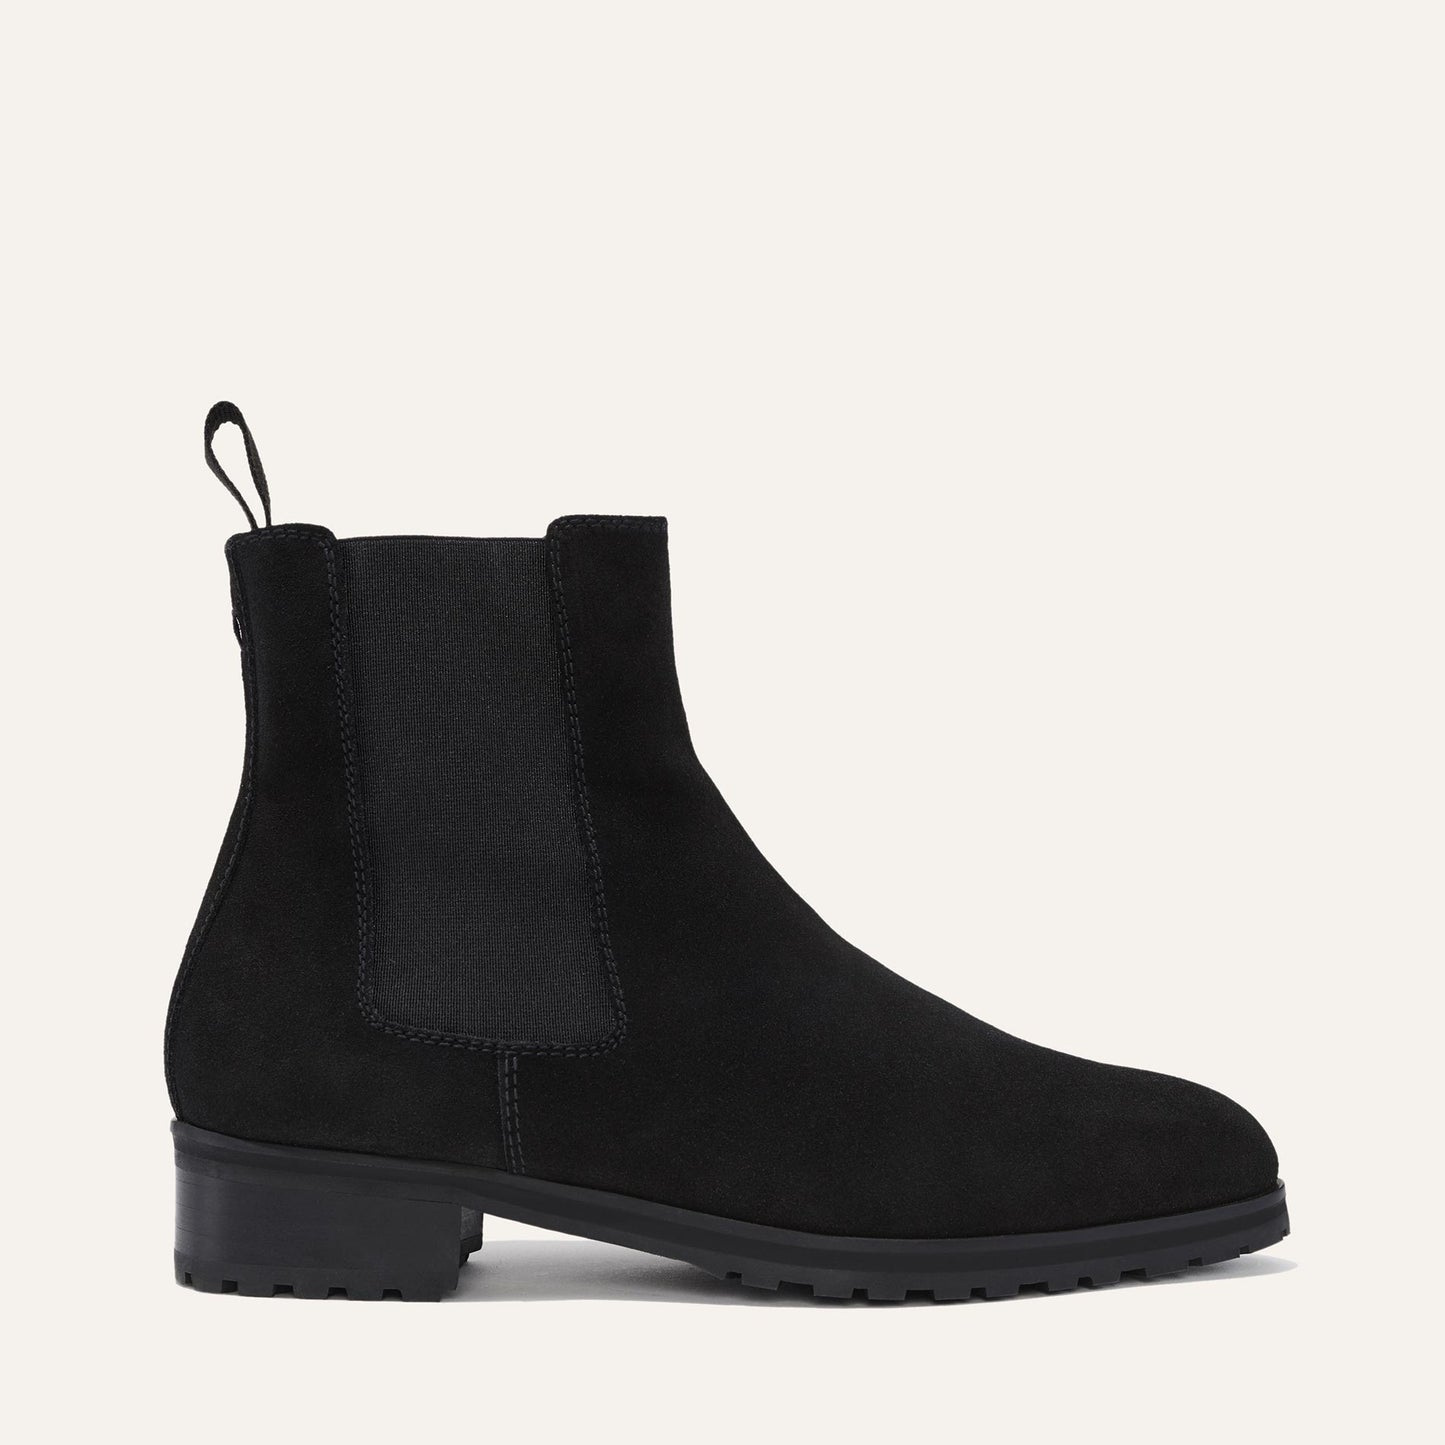 The Chelsea Boot - Black Suede